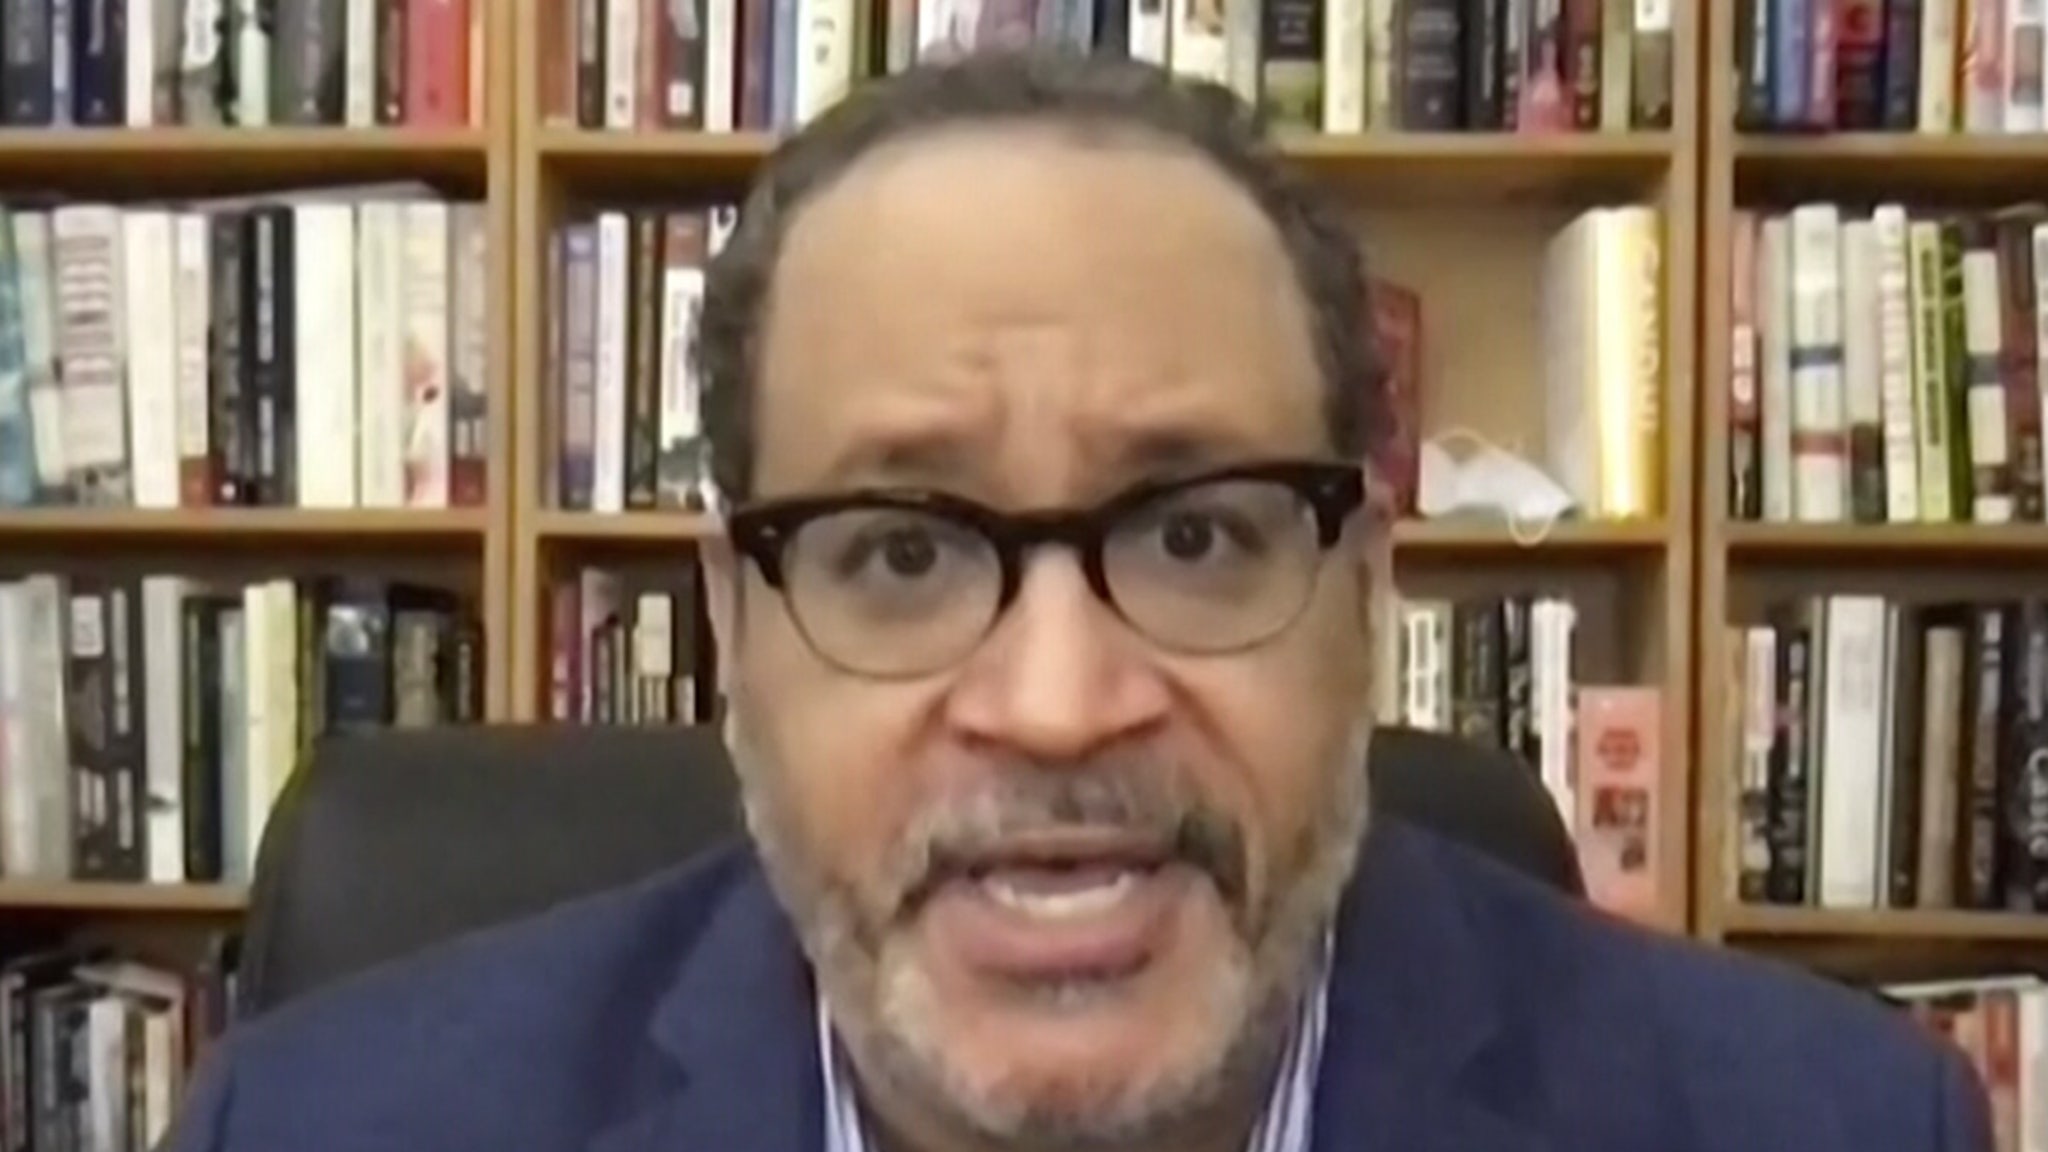 Chris Harrison, Michael Eric Dyson addressed racism in a hard-hitting meeting